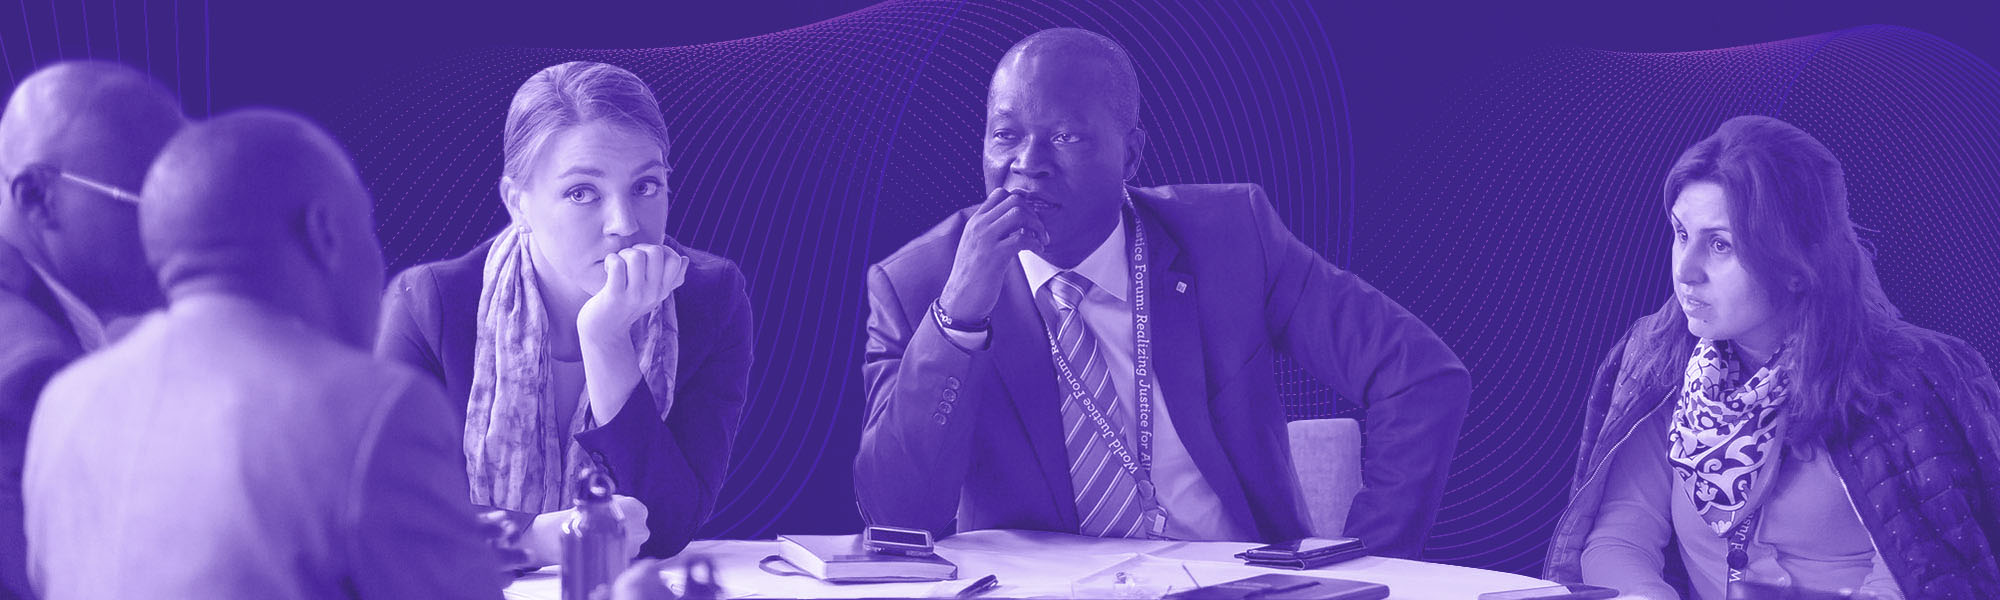 Attendees of the 2019 World Justice Forum with a purple overlay and purple background